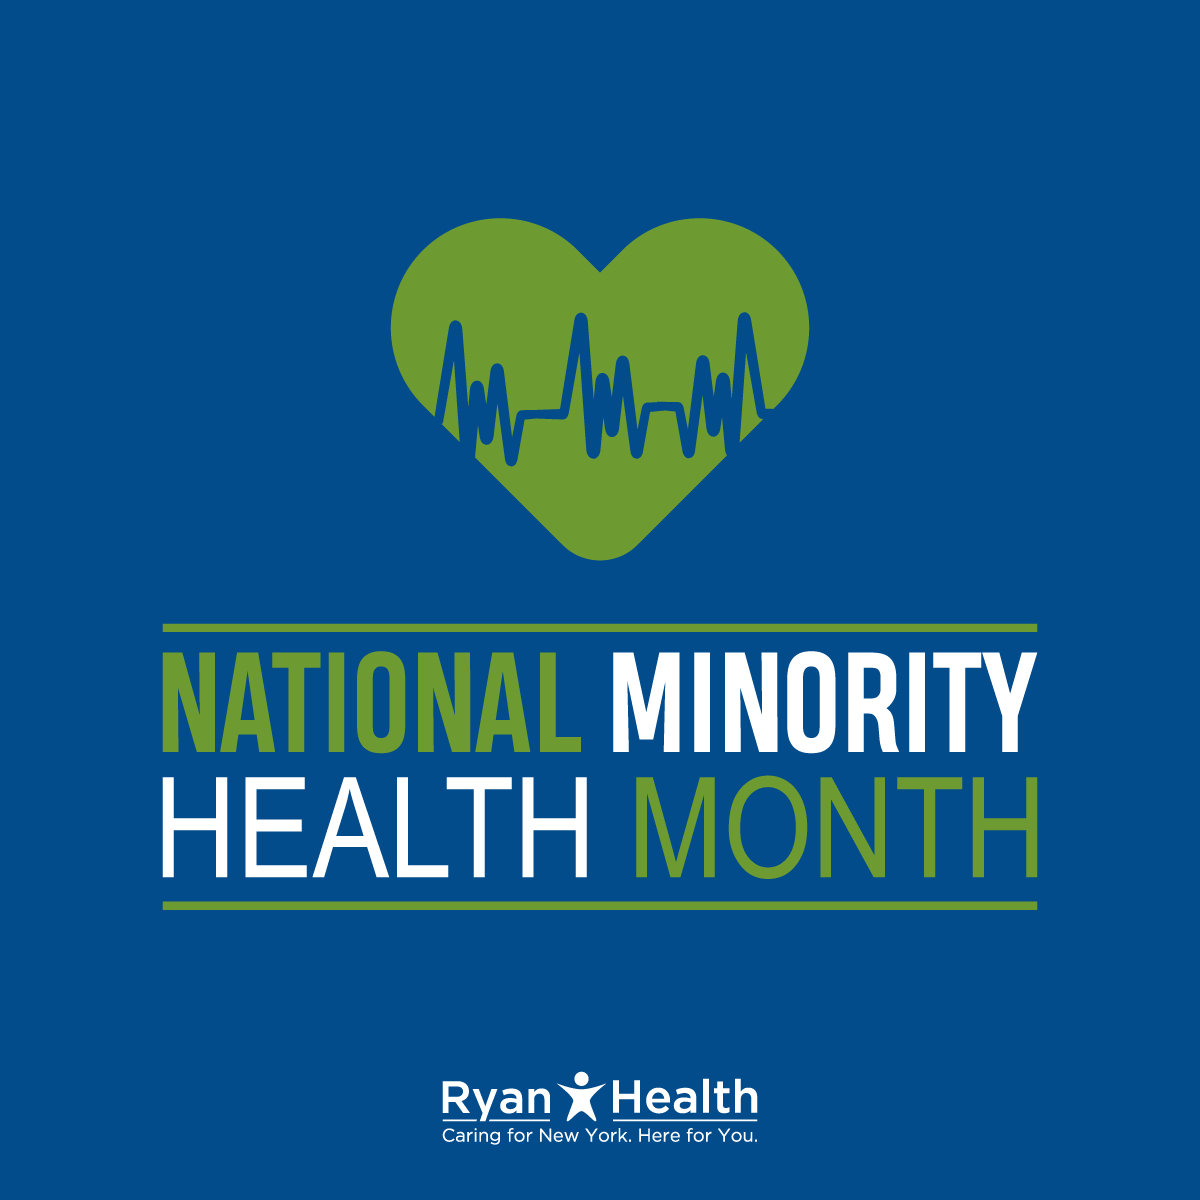 Health care is a right, not a privilege. Ryan Health recognizes that people of color often face disparities in care, and that's why we prioritize tailoring the care we provide to their unique needs. We're committed to championing health equity! #NationalMinorityHealthMonth #NMHM